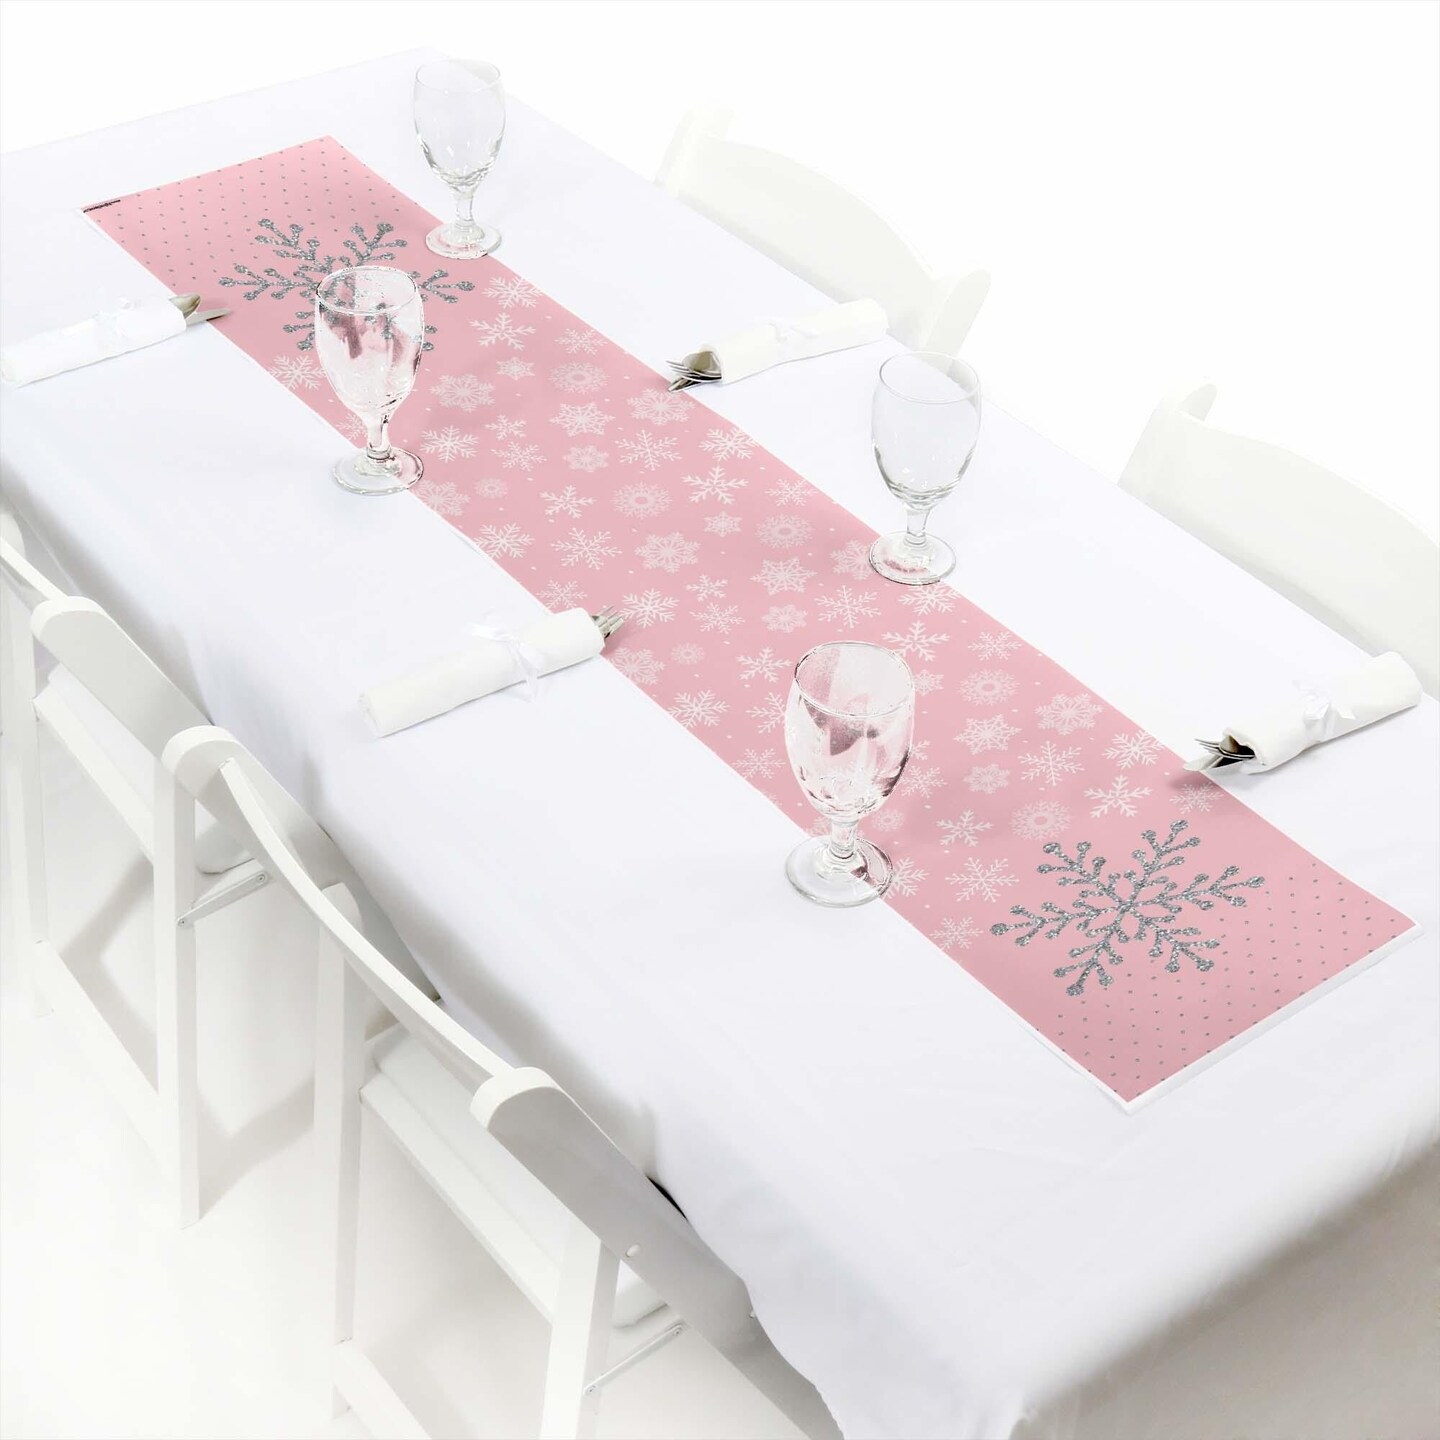 Big Dot of Happiness Pink Winter Wonderland - Petite Holiday Snowflake Birthday Party or Baby Shower Paper Table Runner - 12 x 60 inches